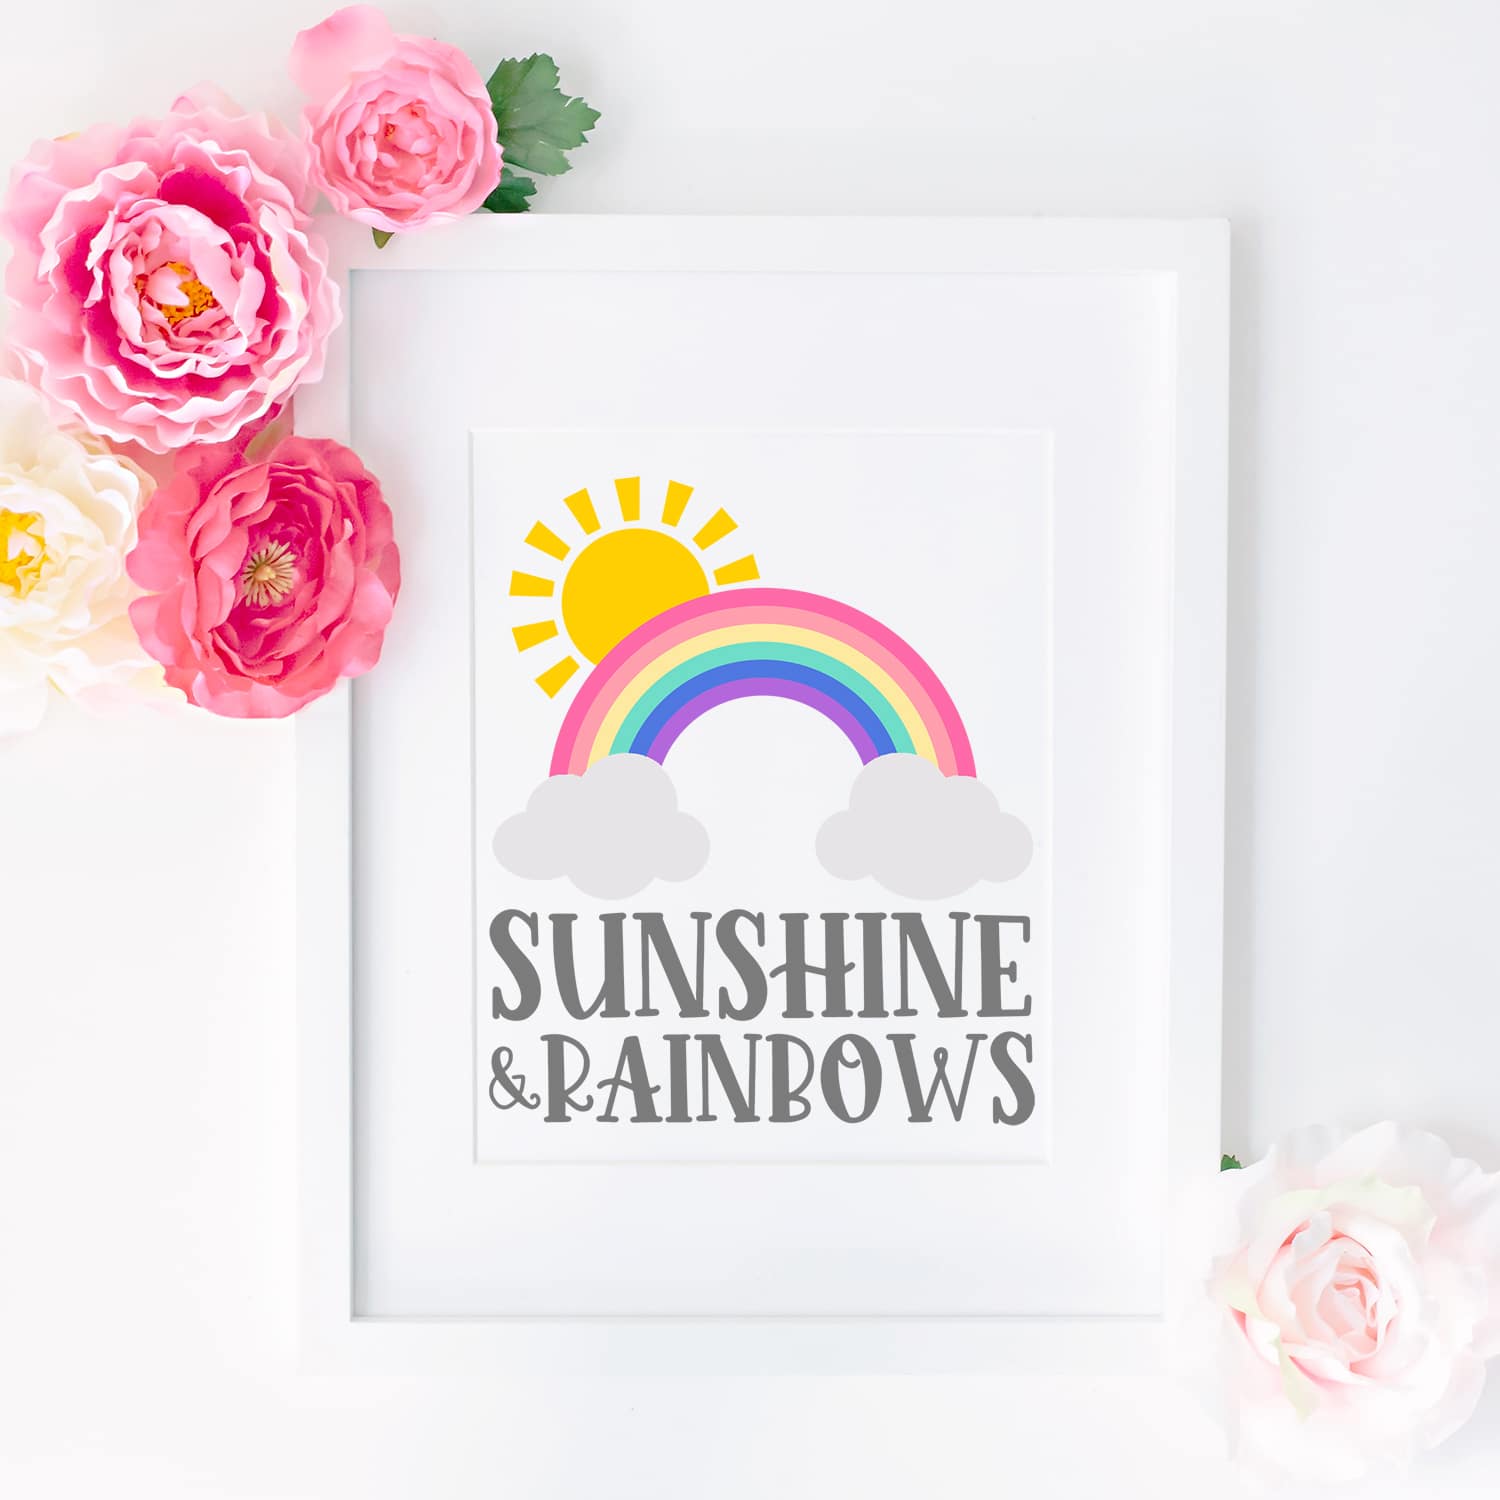 "Sunshine and Rainbows" artwork in a white frame surrounded by pink and yellow flowers